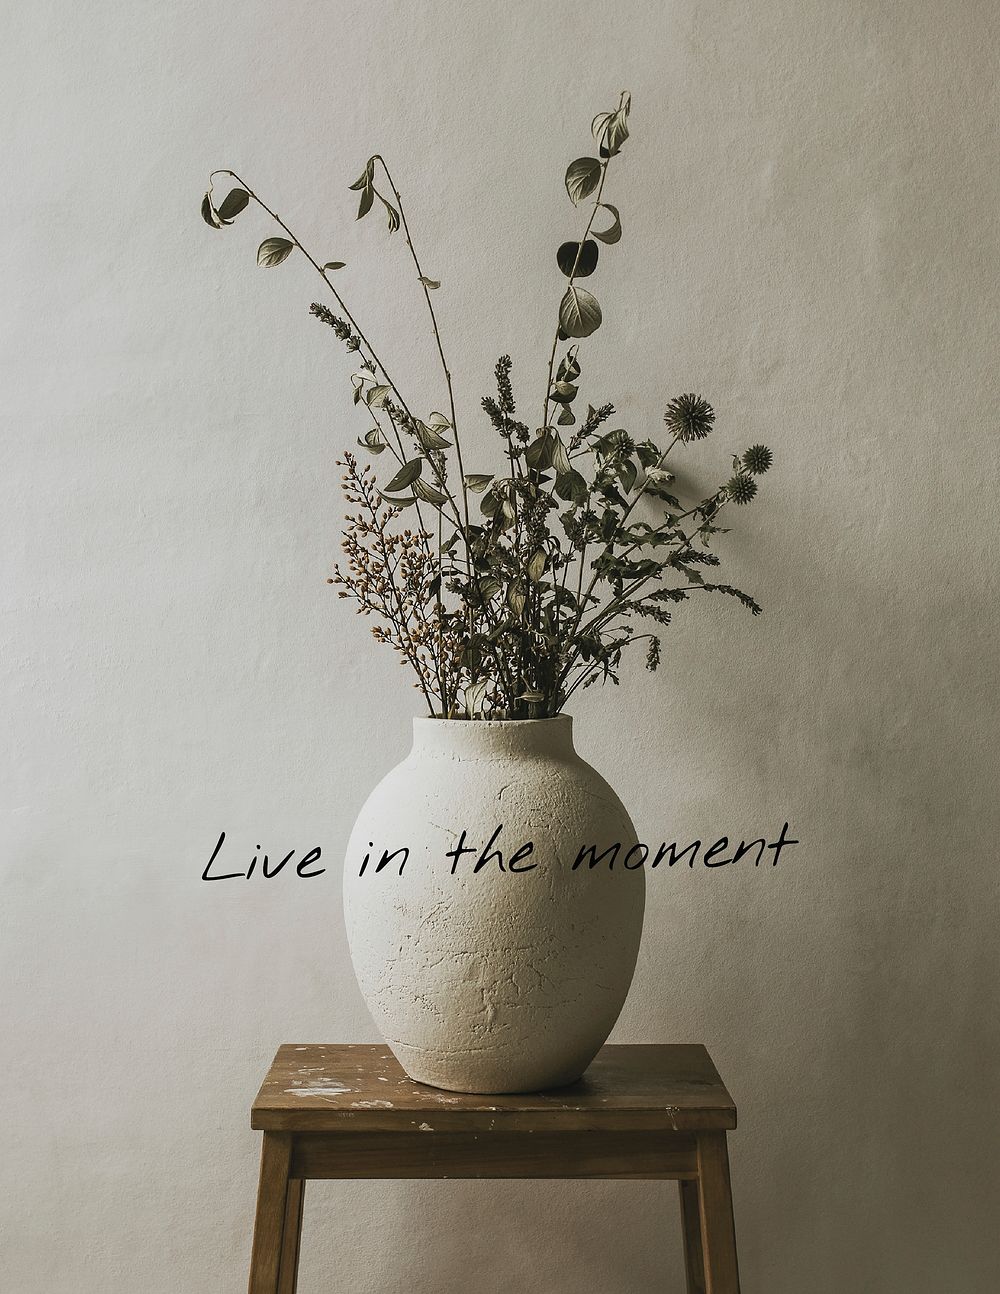 Houseplant aesthetic flyer template, live in the moment quote psd